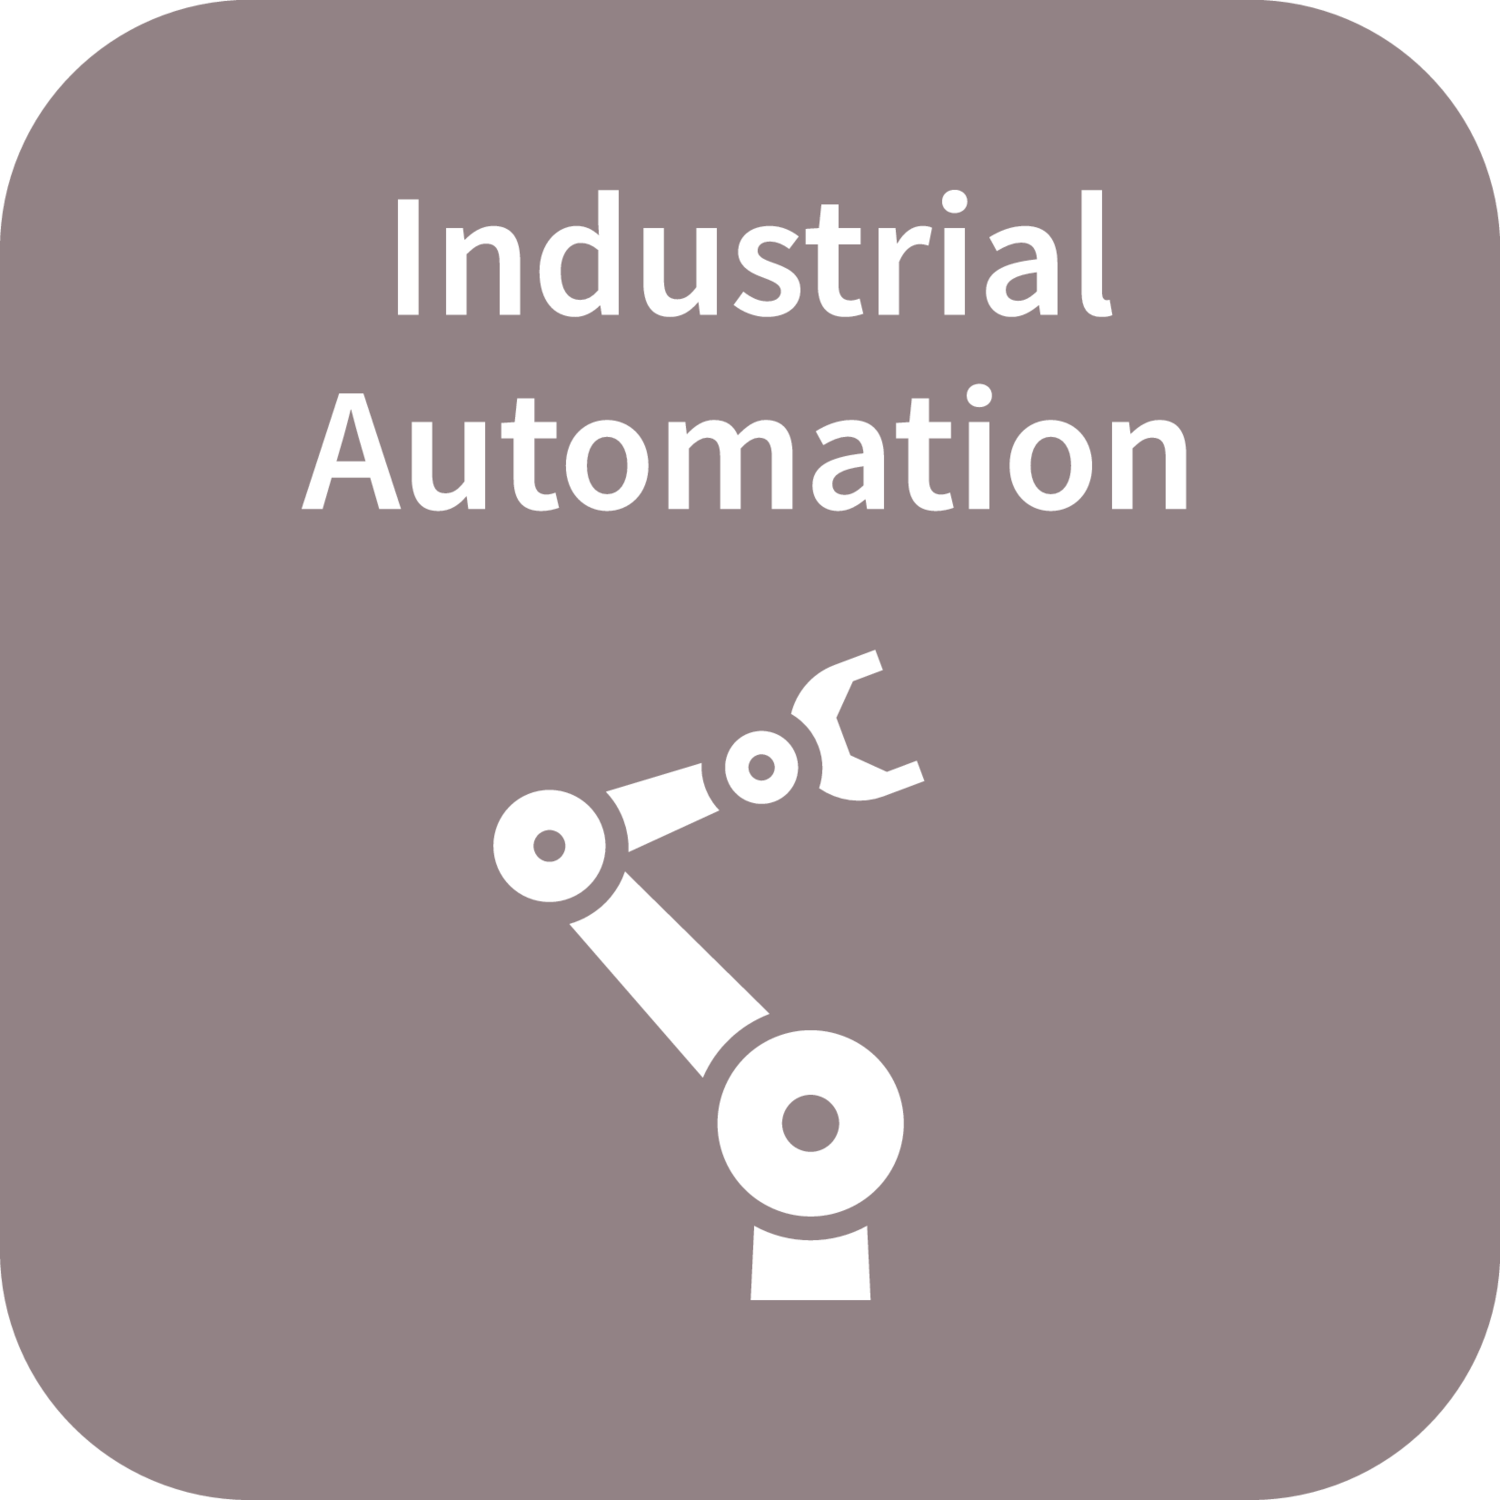 industrial automation clipart - photo #32